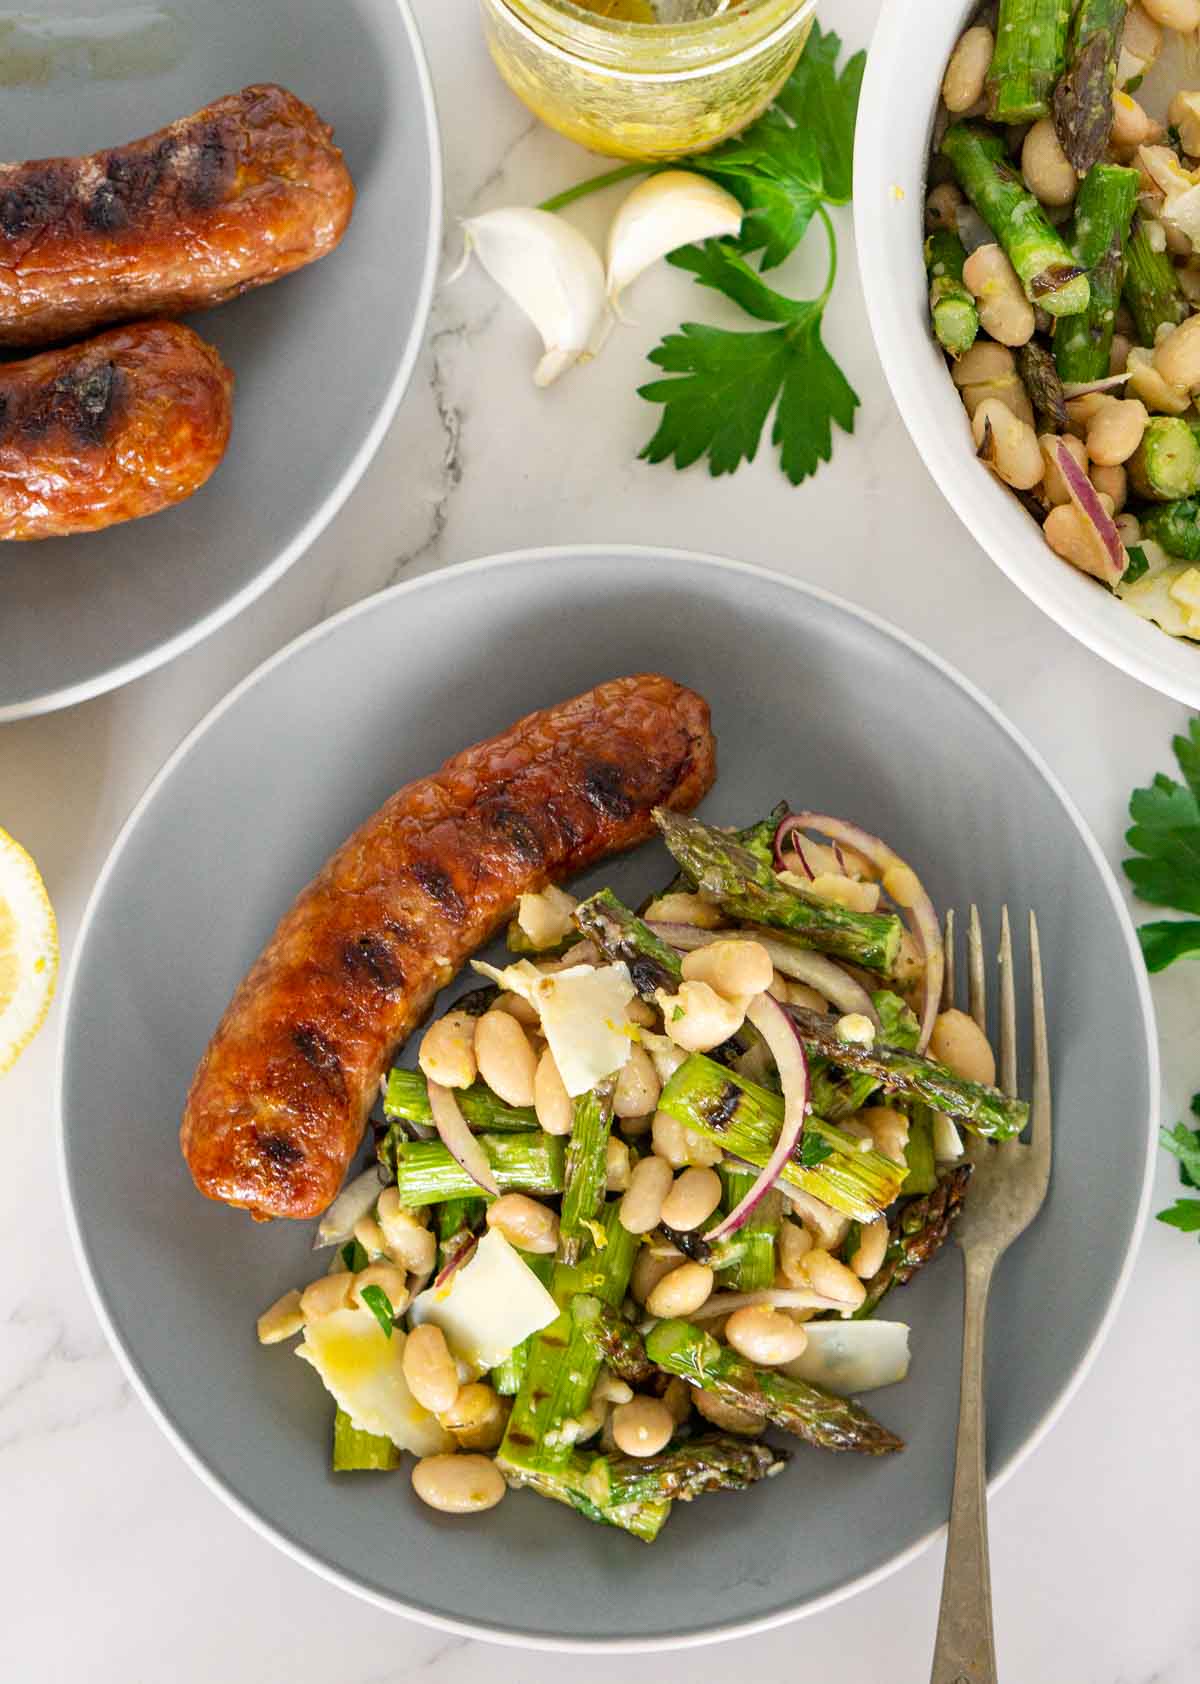 Plate of grilled sausage with grilled asparagus salad.